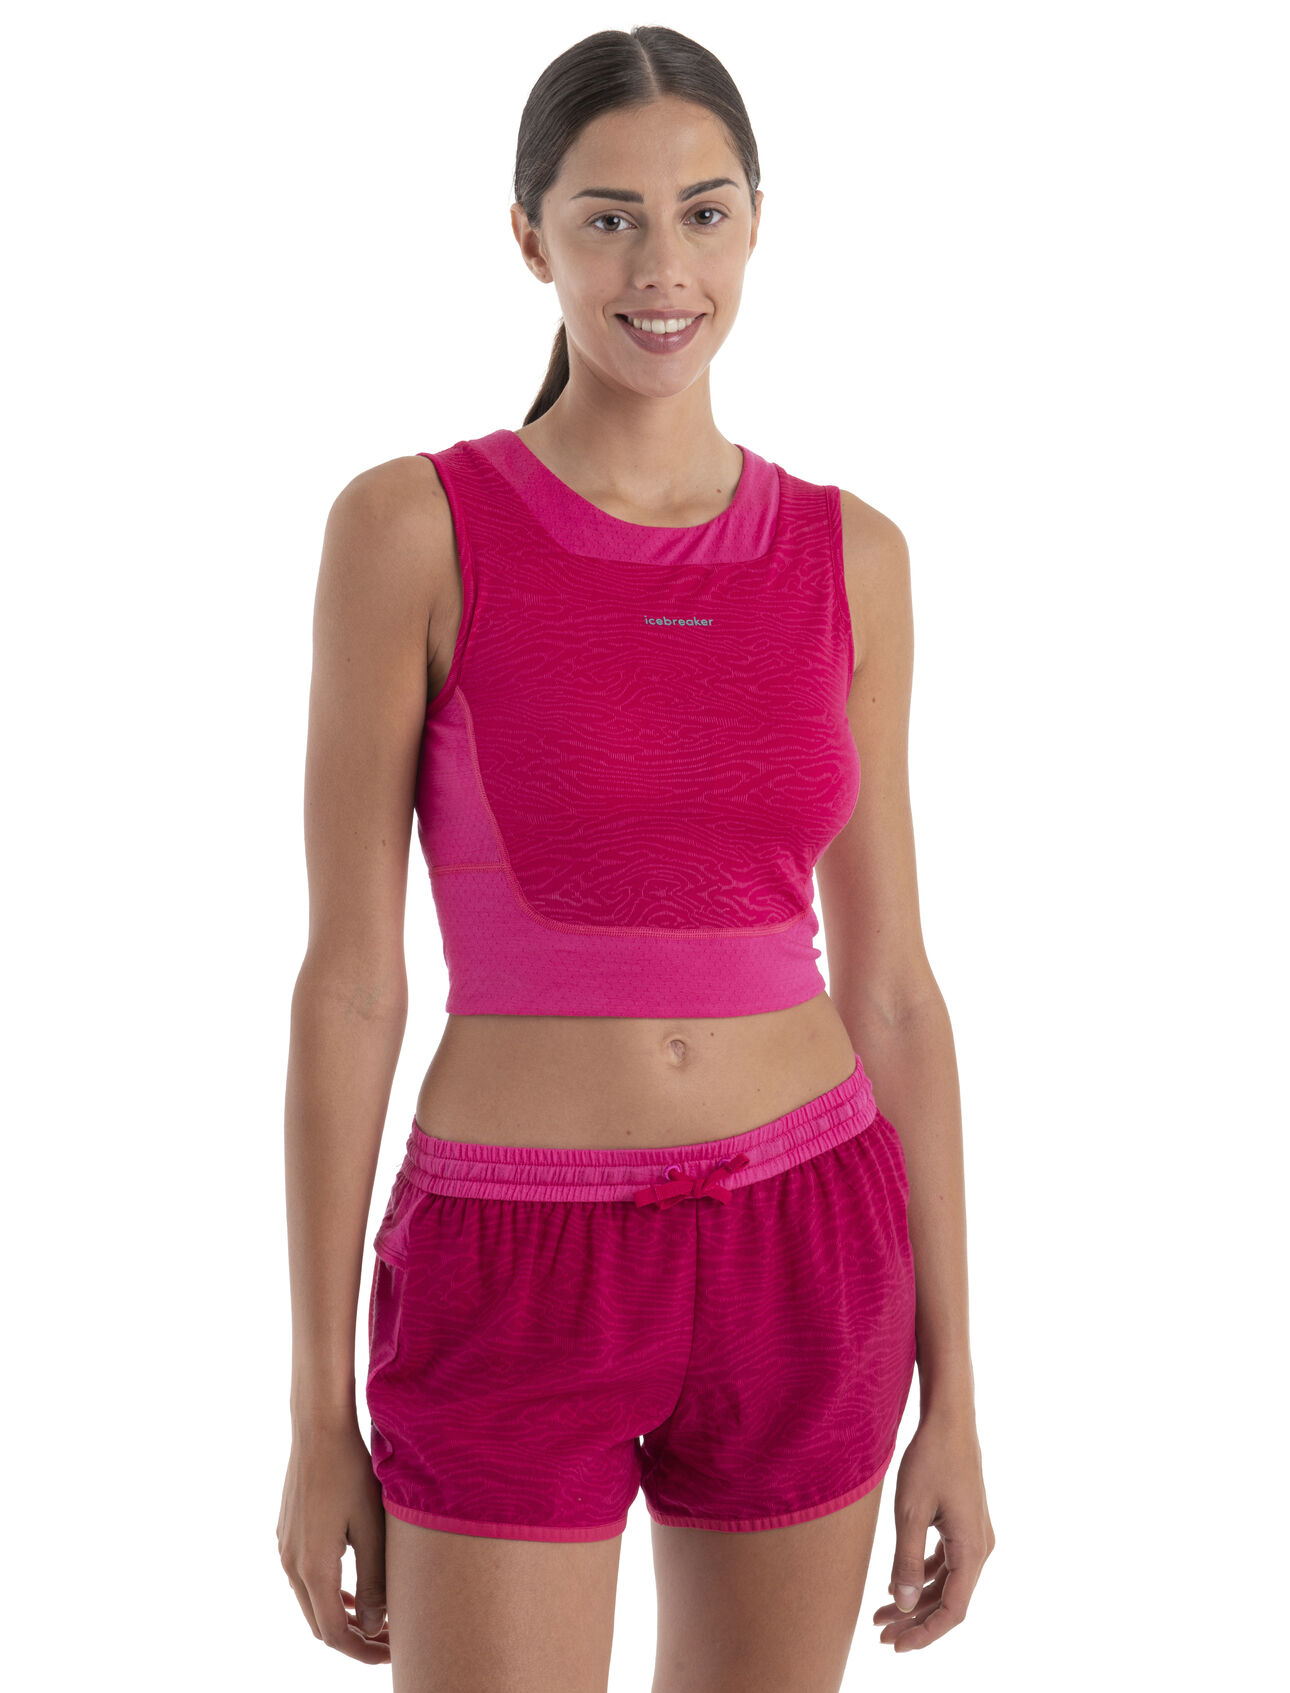 Womens Merino 125 ZoneKnit™ Cropped Bra-Tank IB Topo Lines Our most breathable, lightweight top for high-output activities, the 125 ZoneKnit™ Cropped Bra-Tank Topo Lines features a body-mapped combination of Cool-Lite merino jersey and ultra-breathable eyelet mesh, with a built-in bra. The dynamic all-over print comes from a combination of topographic contour lines and animal prints.